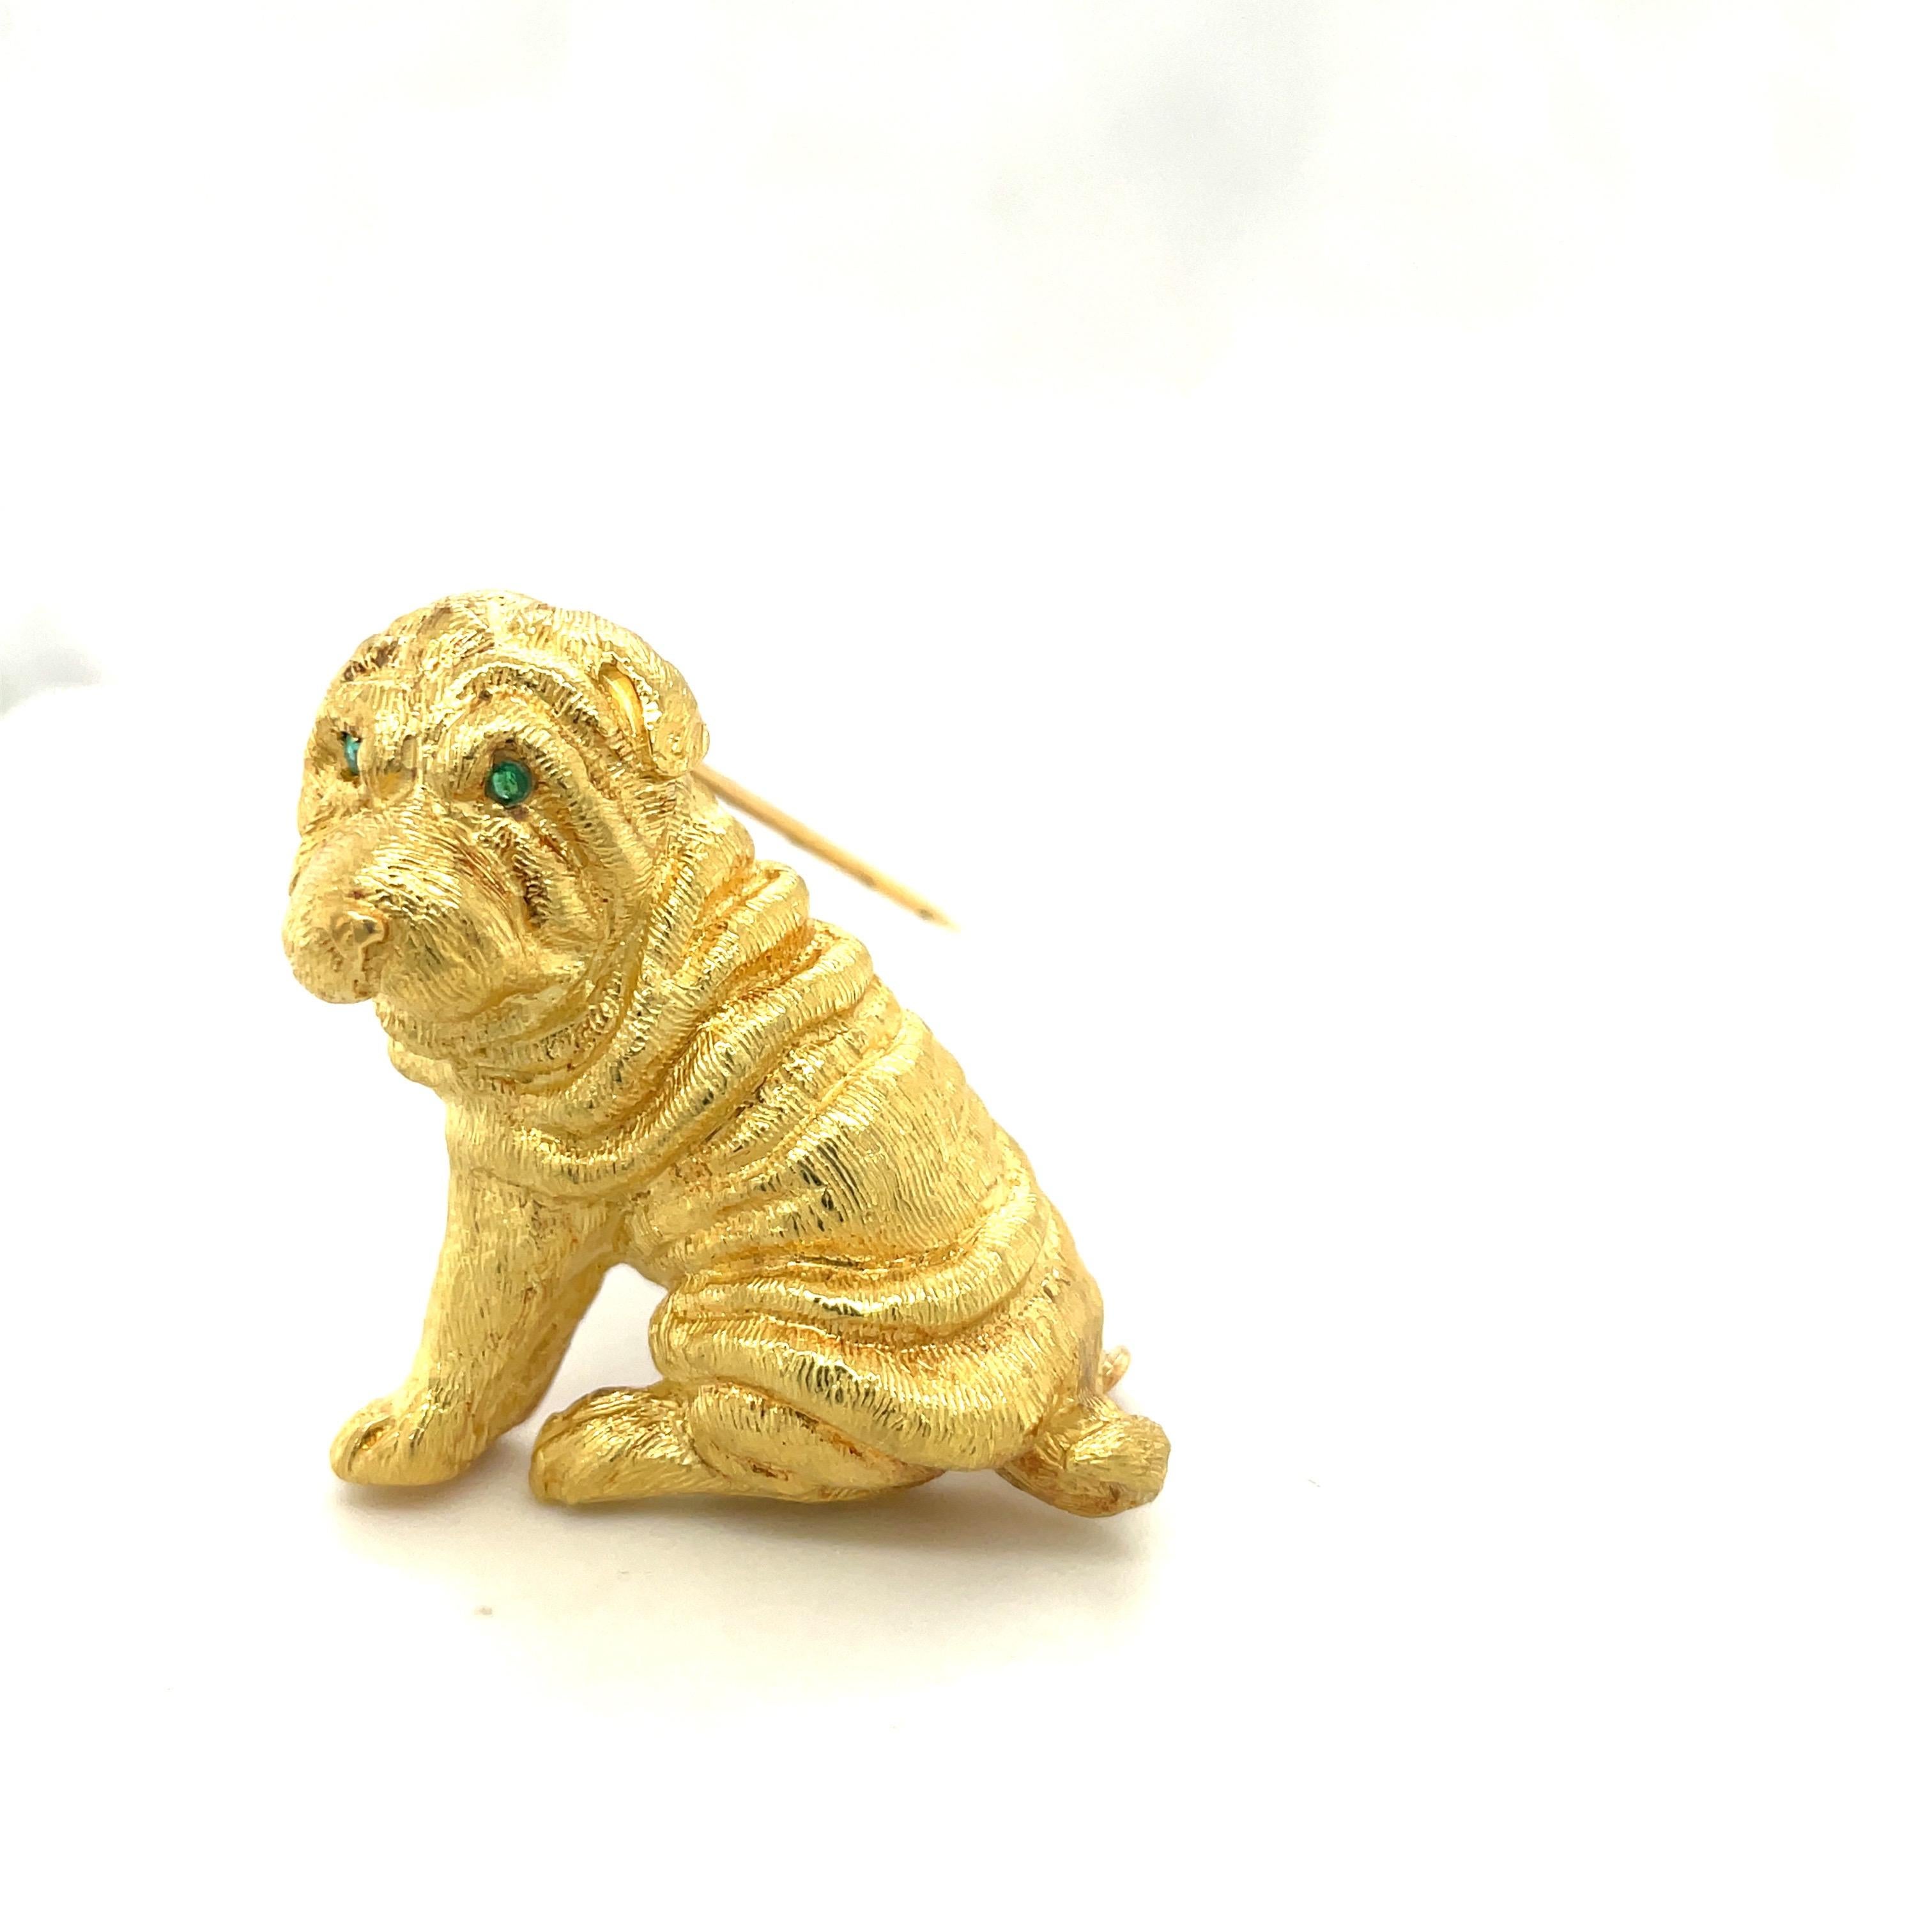 Crafted by Roger Guillochon ,from France for Cellini Jewelers, this 18 karat yellow gold  Shar Pei brooch depicts magnificent craftsmanship. The dog's body is etched in a satin finish. His soulful eyes are set with emeralds . He measures 1.5